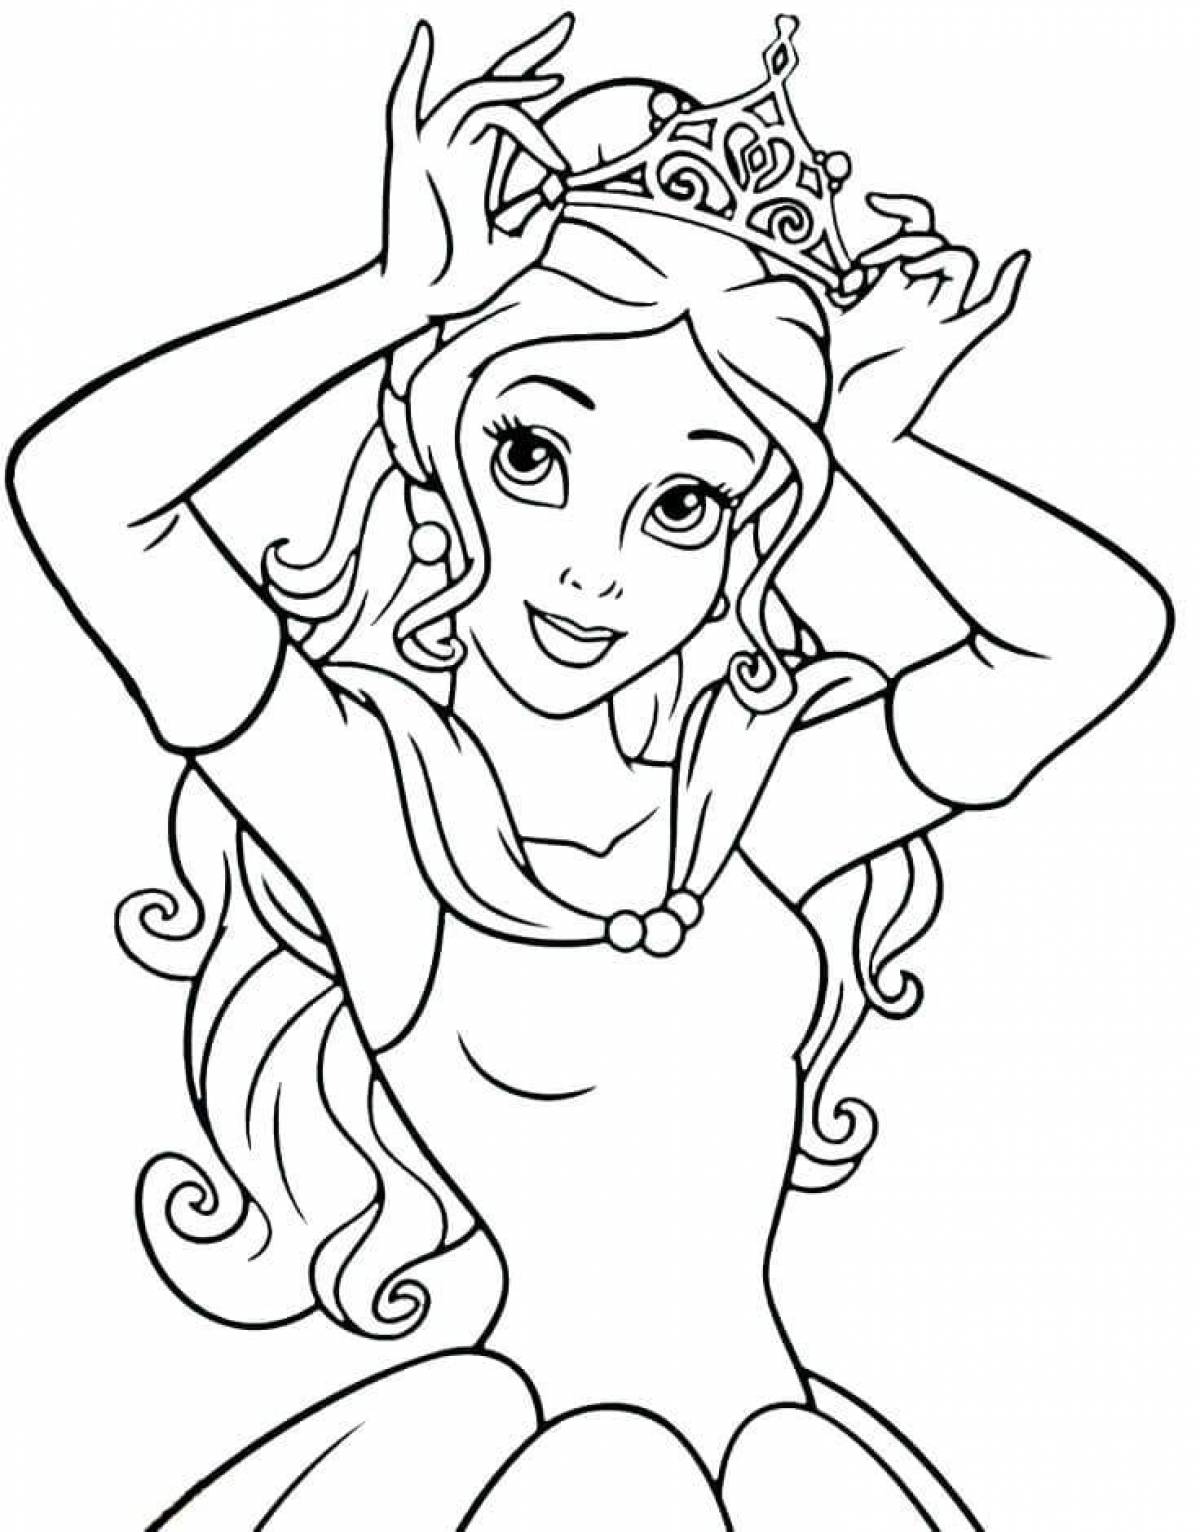 Glowing belle coloring page